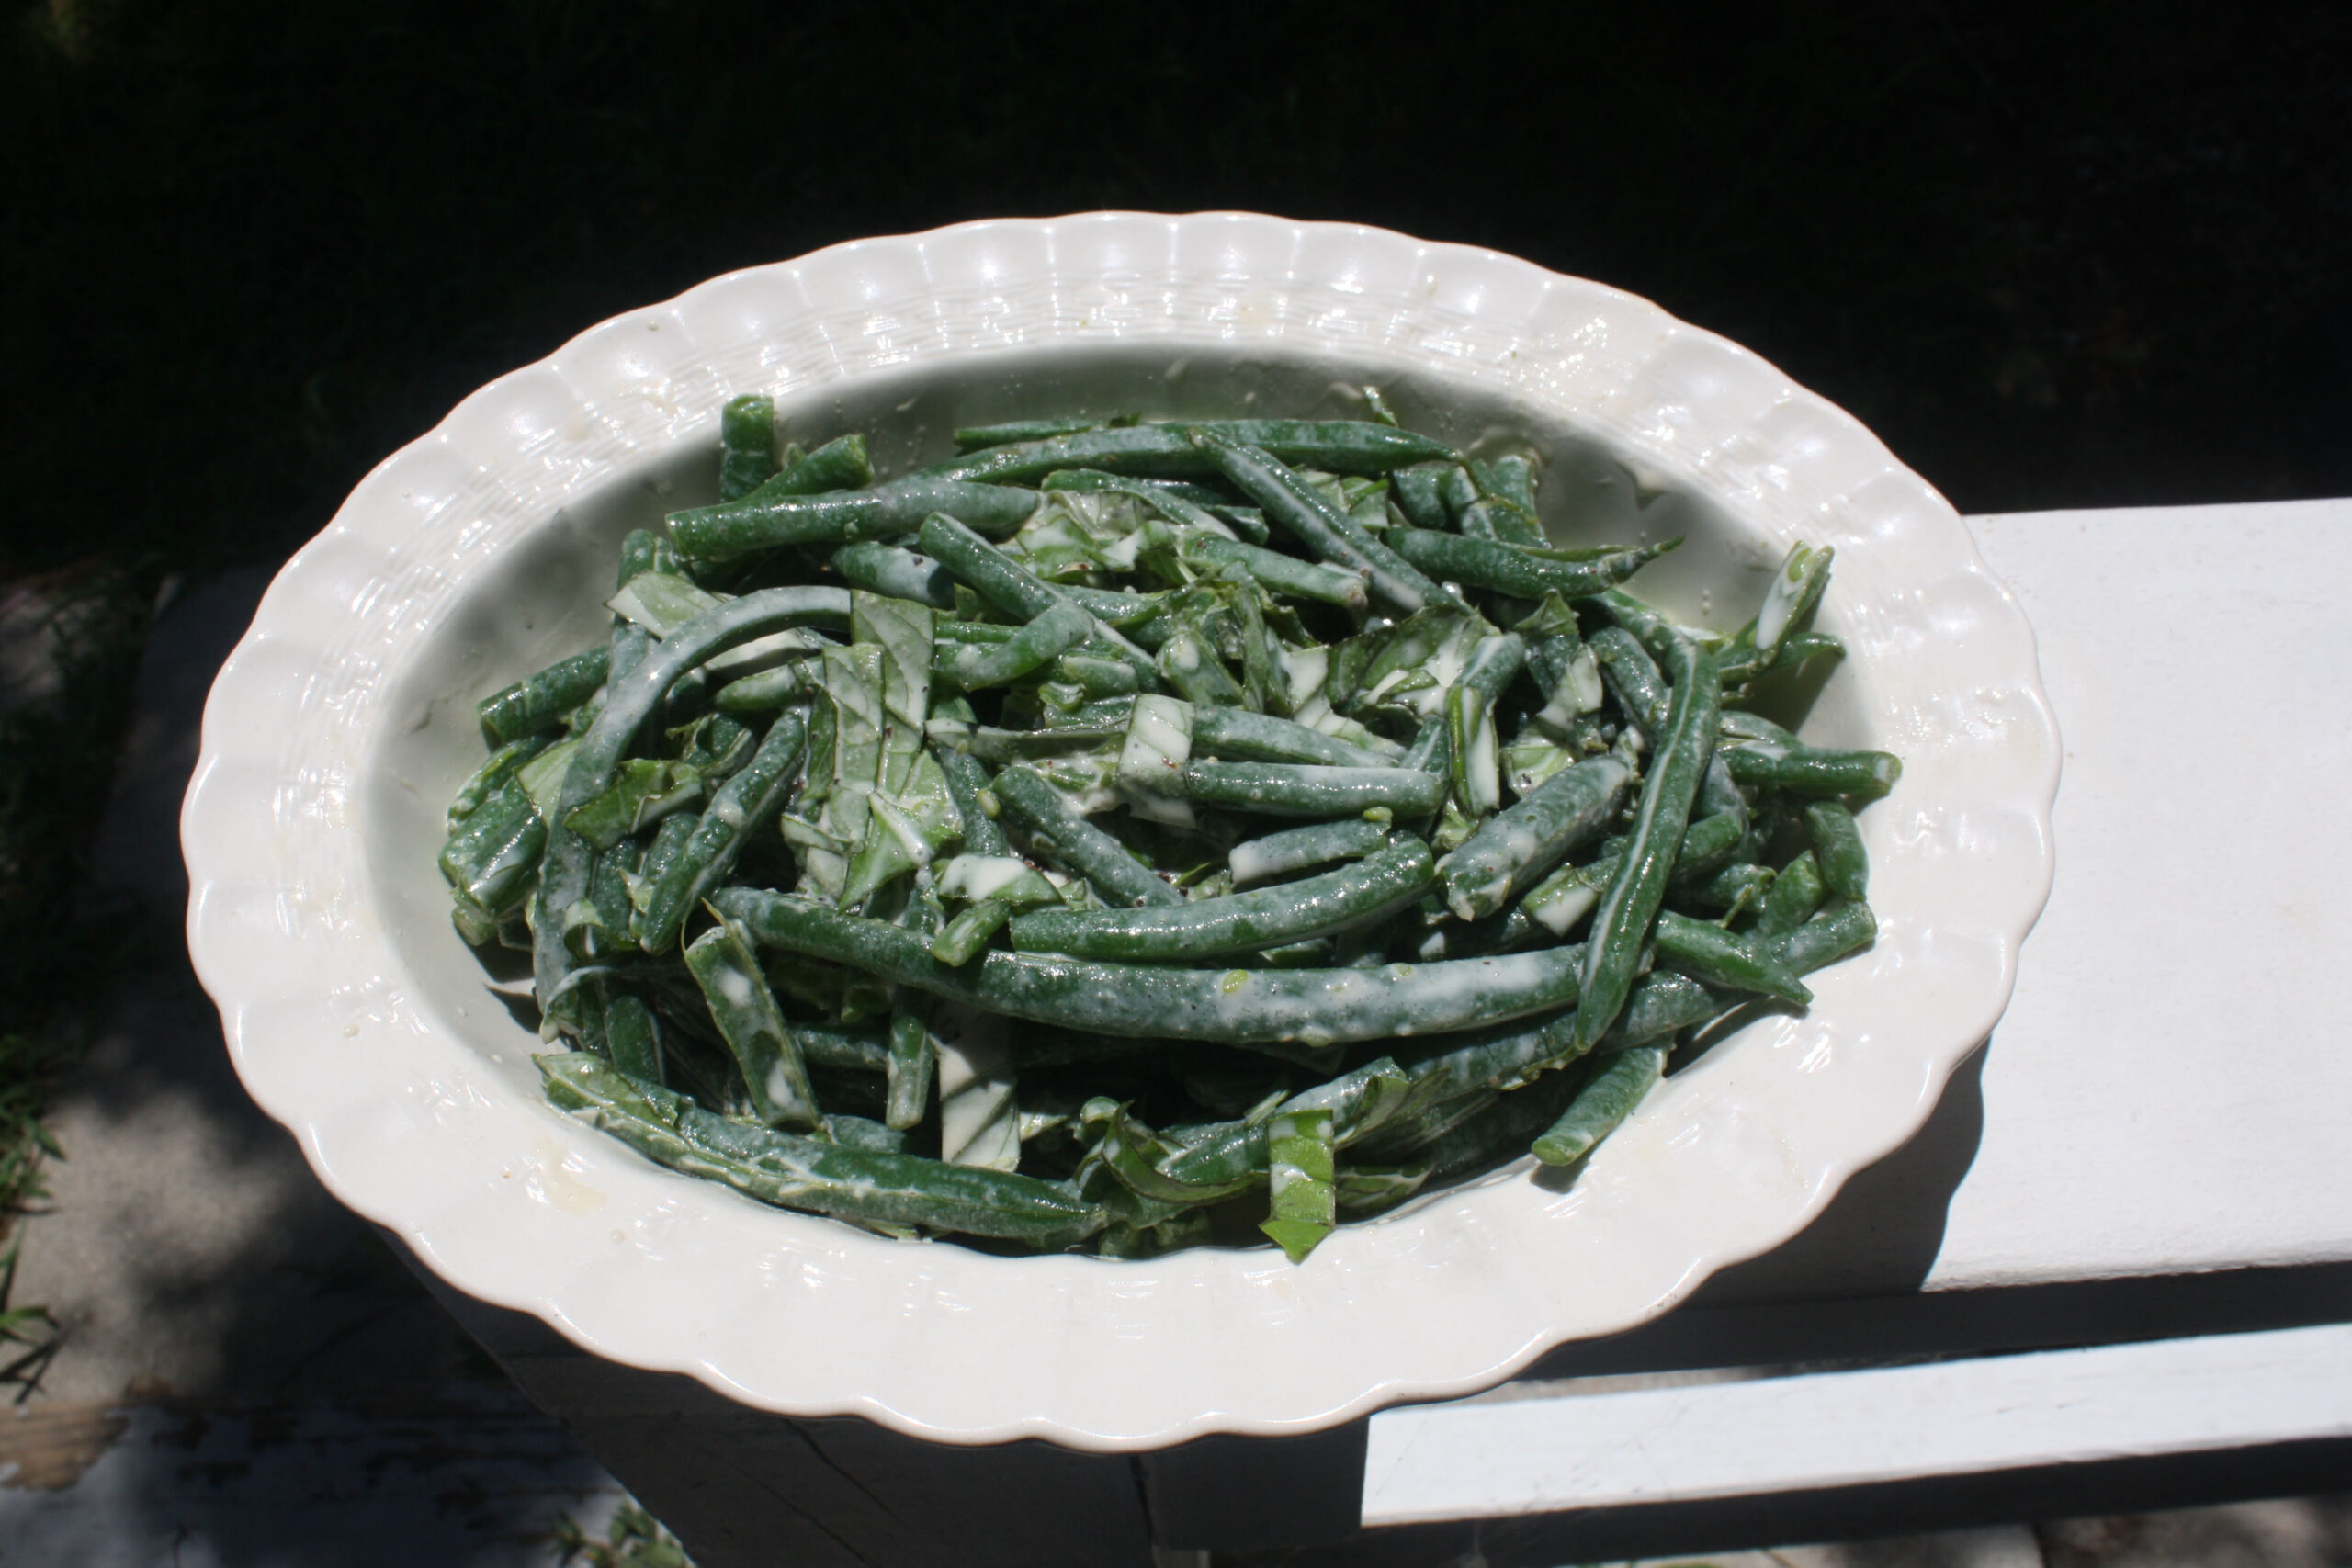 Chilled Herby Green Bean Salad plated and ready to eat